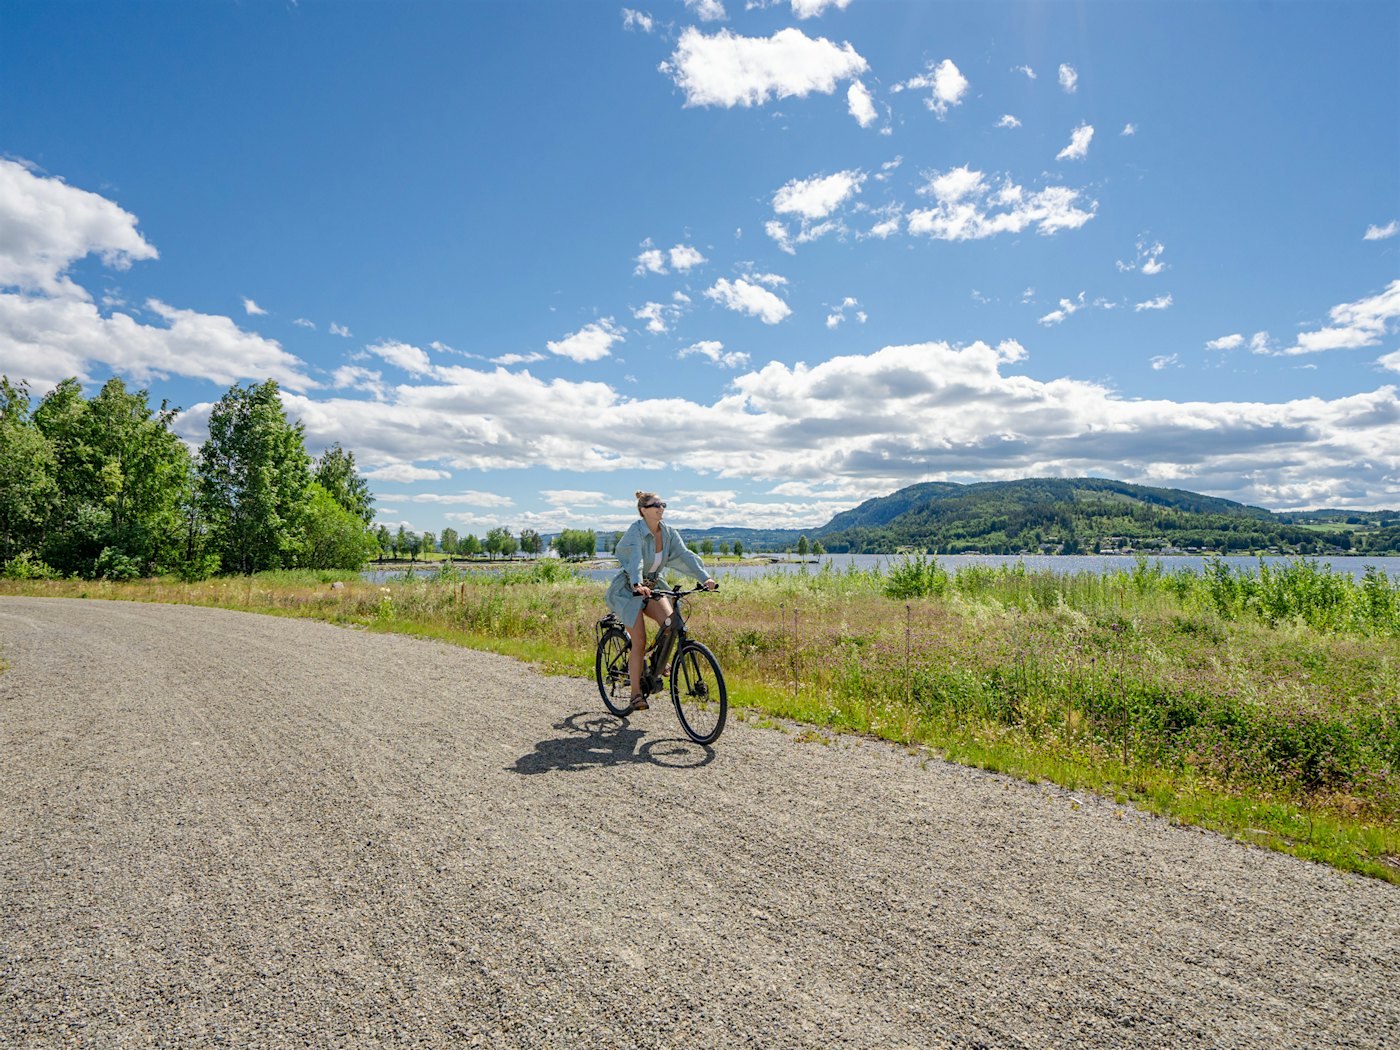 A woman cycles along a dirt road with a nice view of Mjøsa, green trees and a small flower meadow. Photo